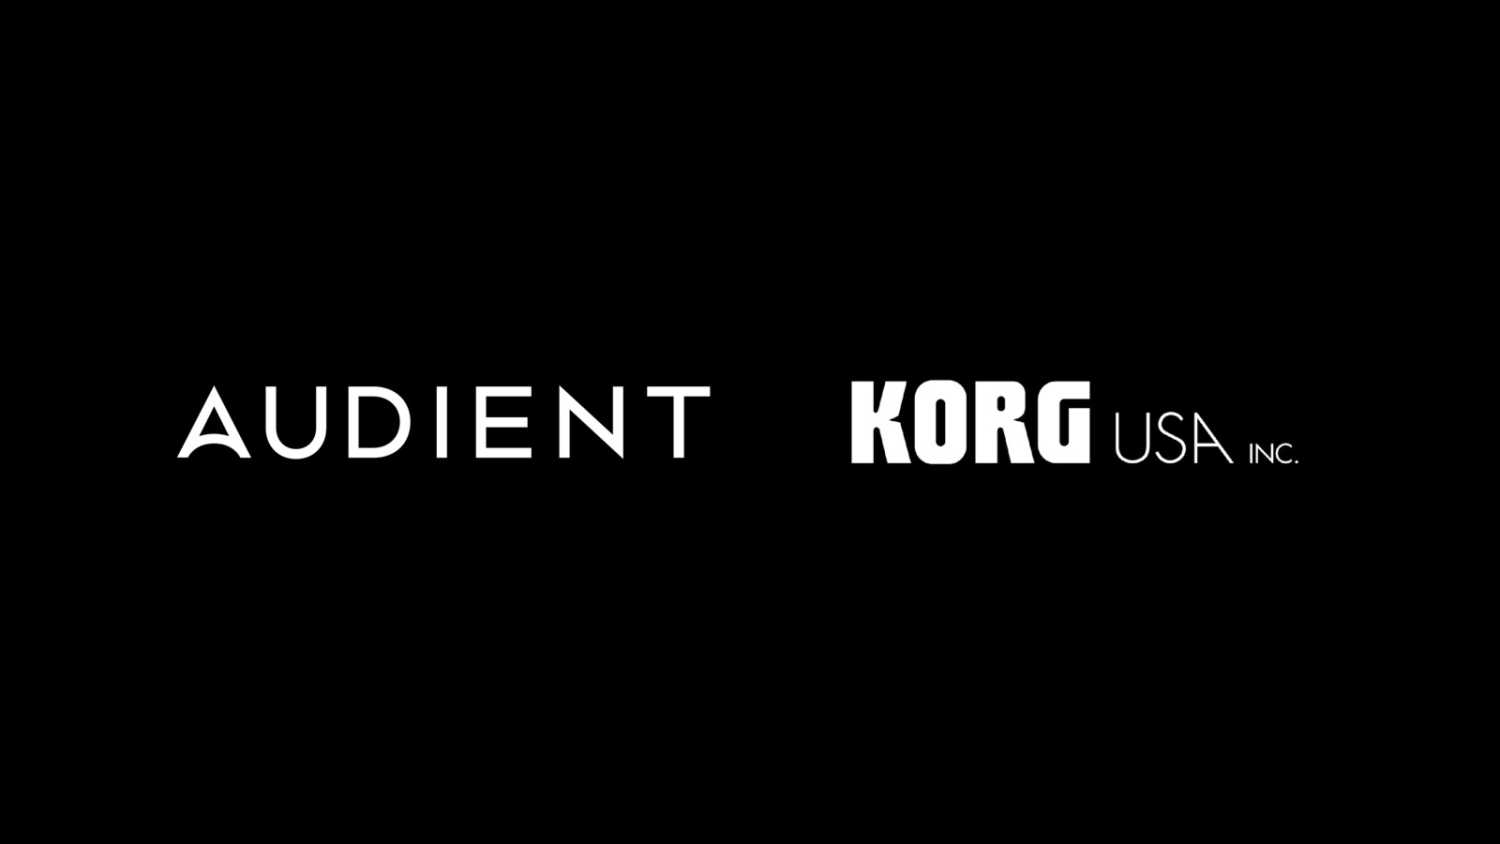 The Audient-Korg partnership is up and running